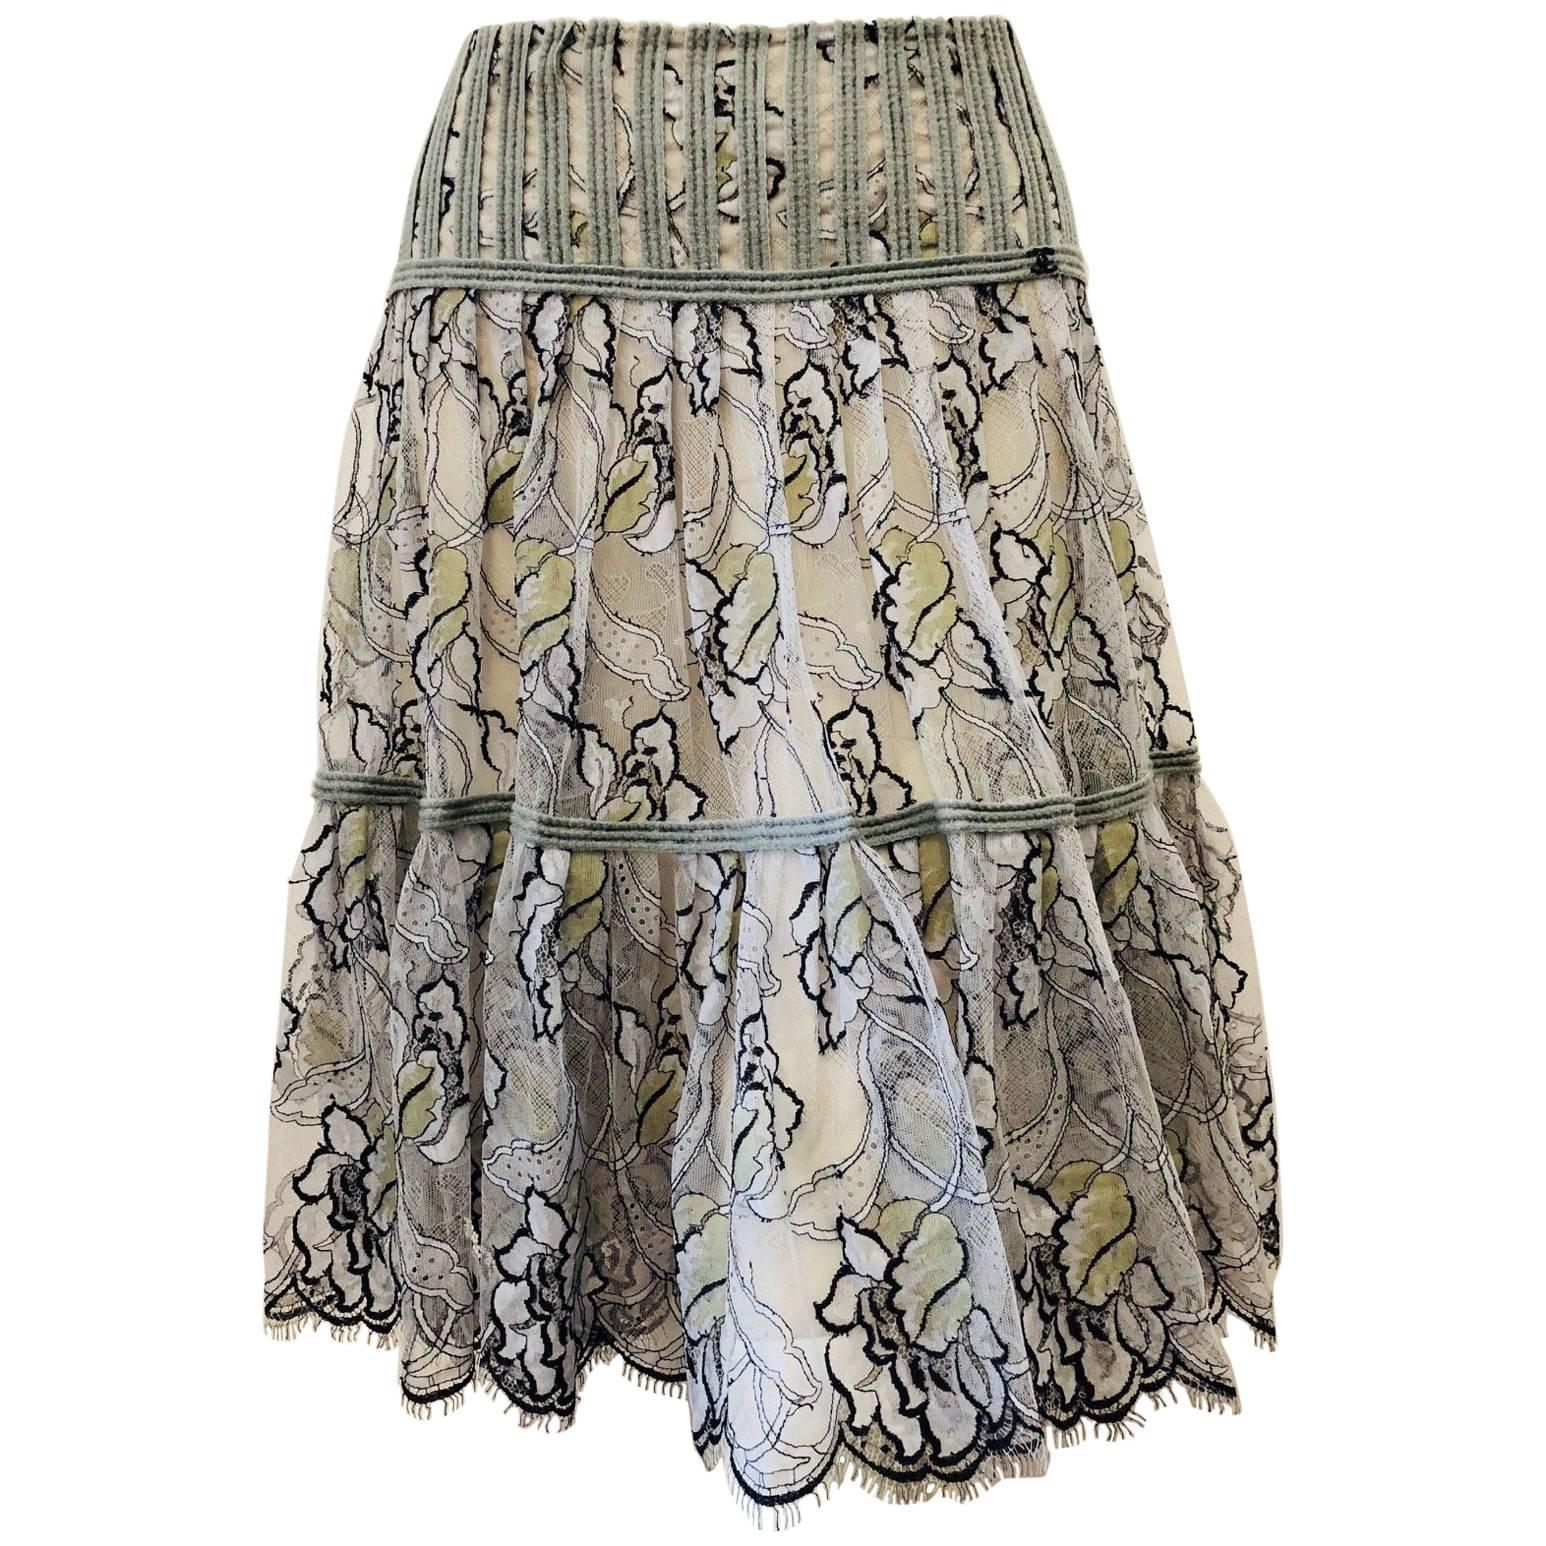 Charming Chanel Lace in Grey, Black and Green Floral Print 3 Tier ...